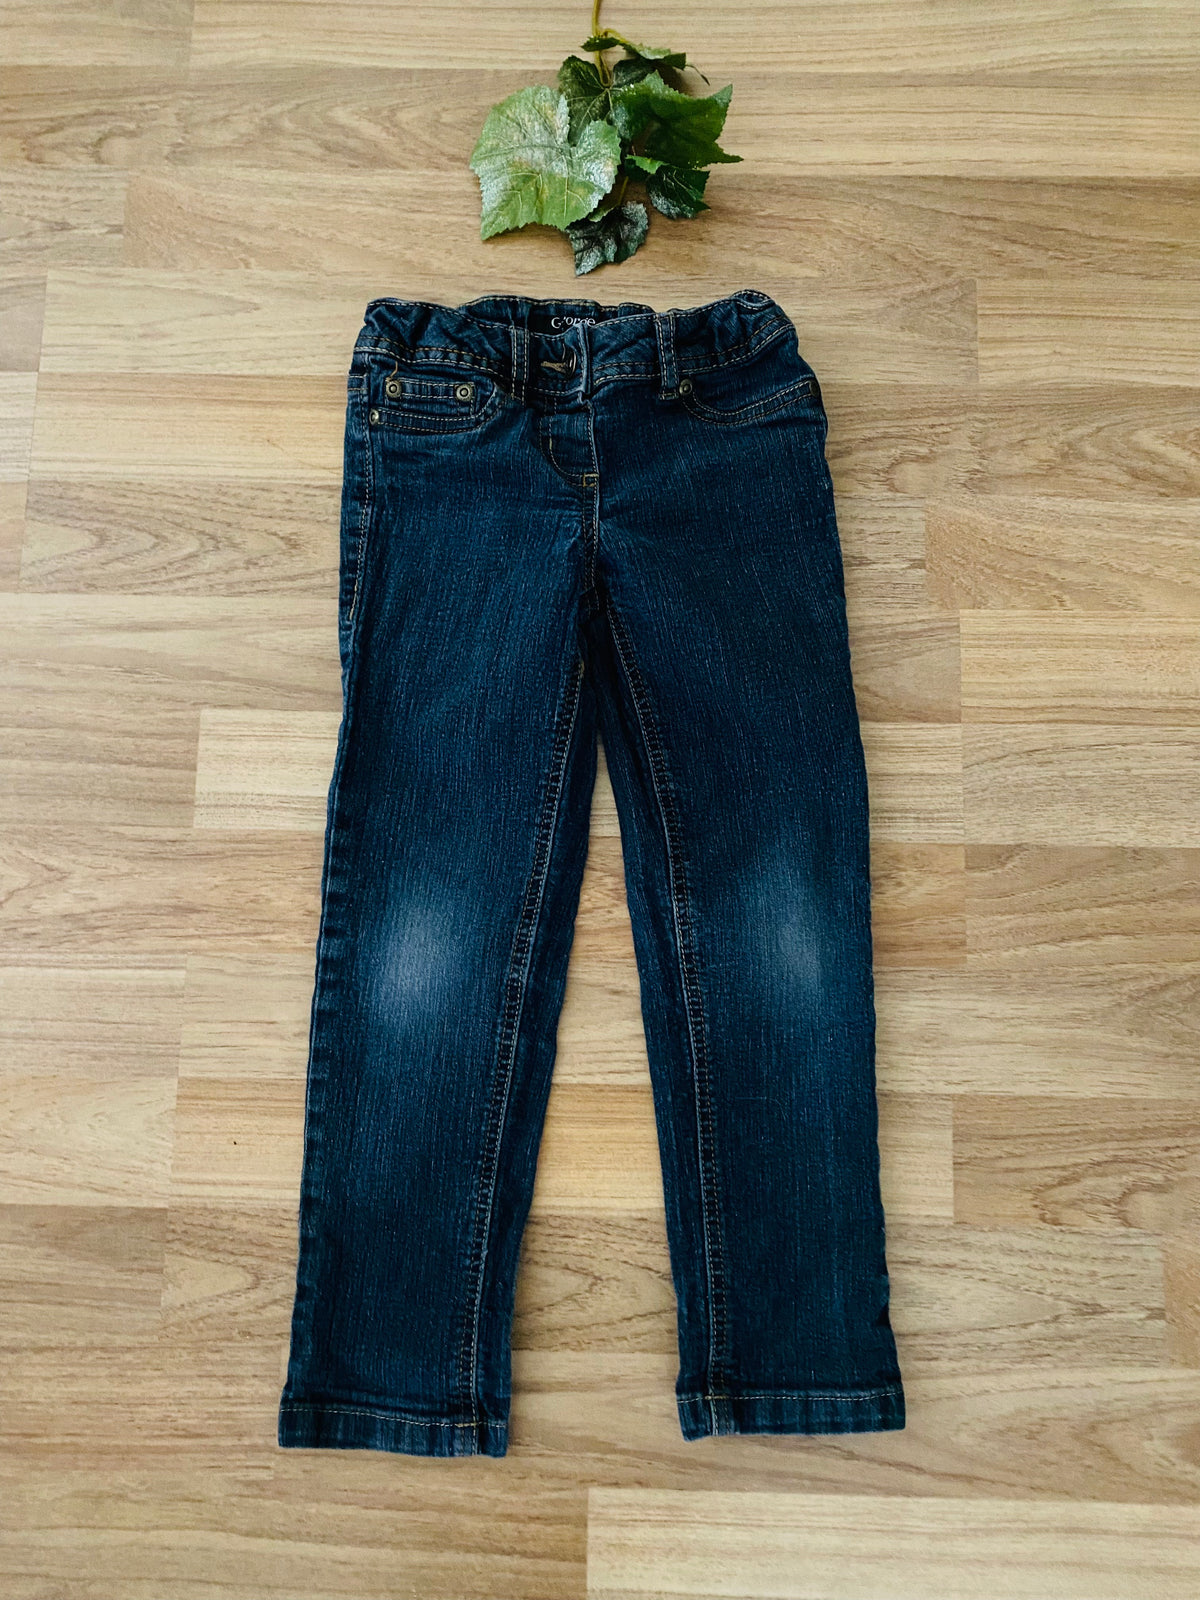 Jeans (Girls Size 5)